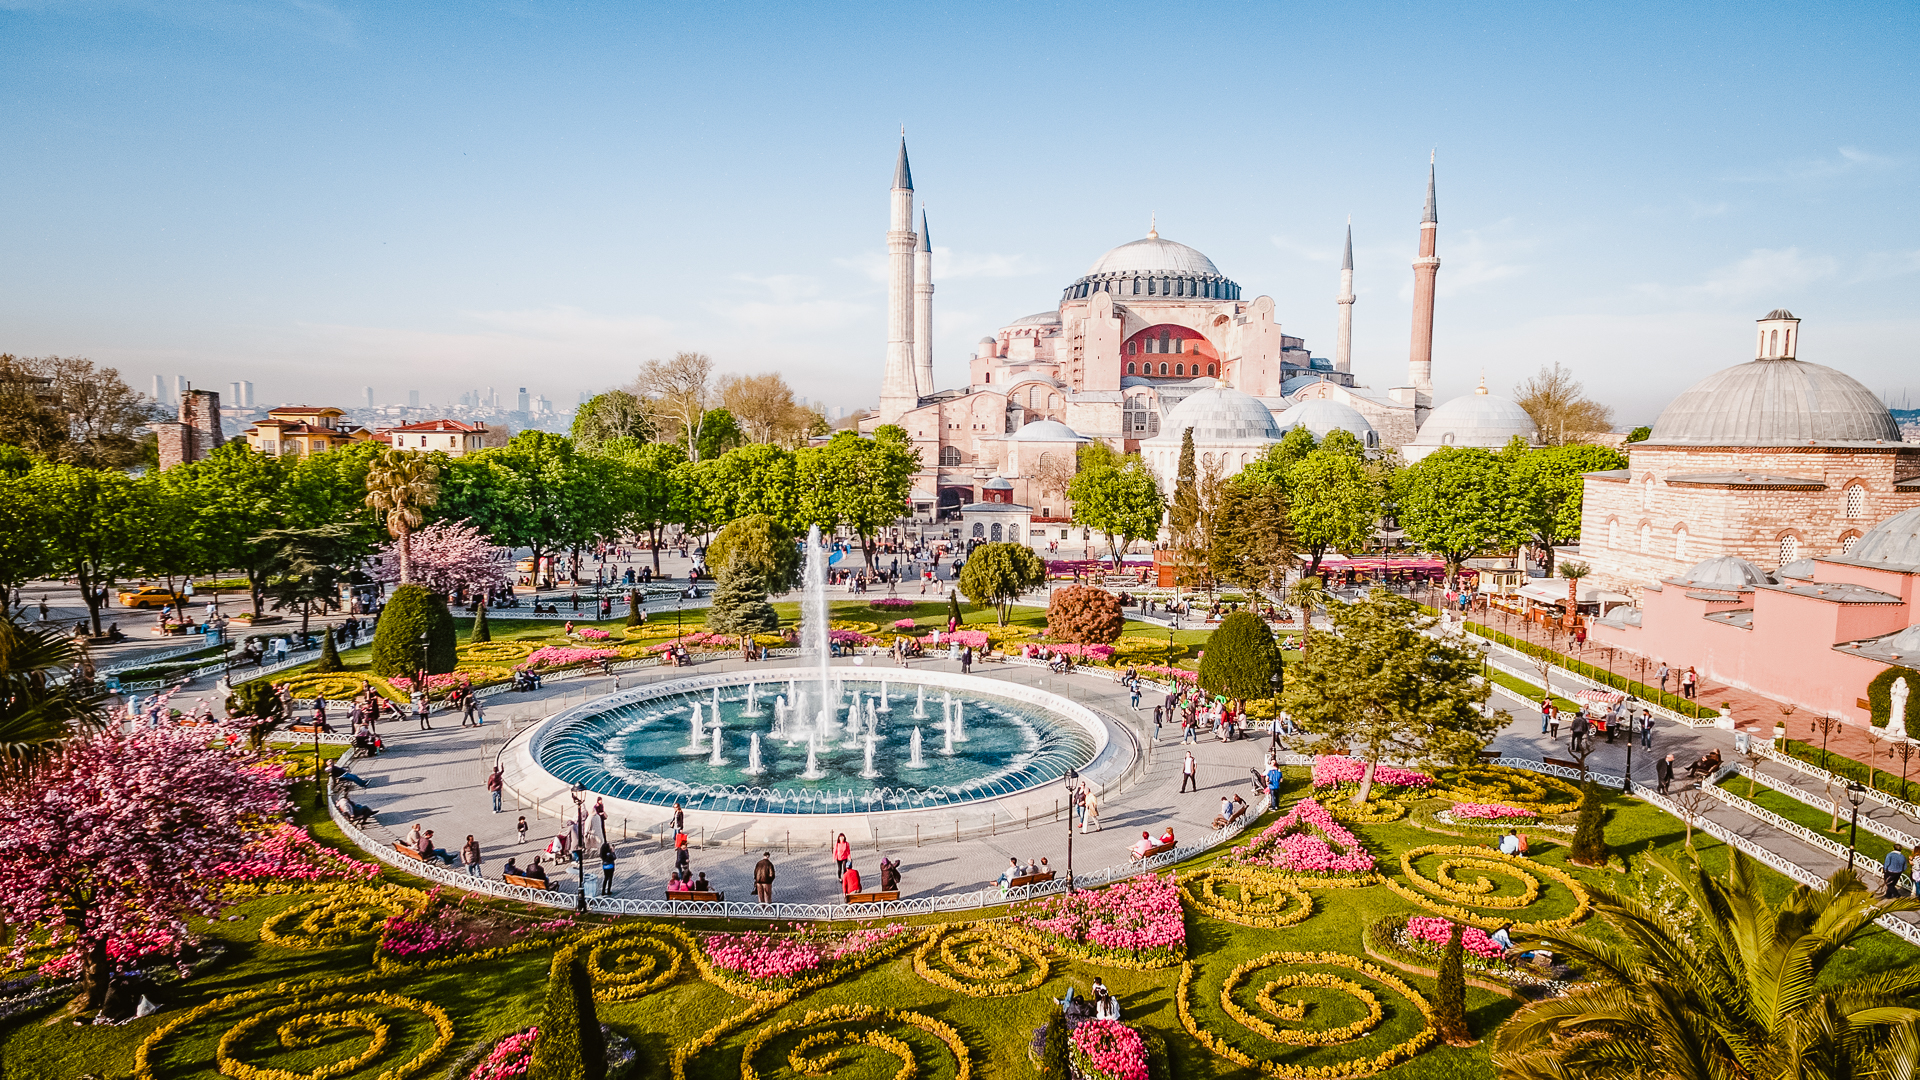 Aerial view of Hagia Sophia in Istanbul, Turkey with a huge fountain, fresh colored grass and intricate gardening work in a city park.